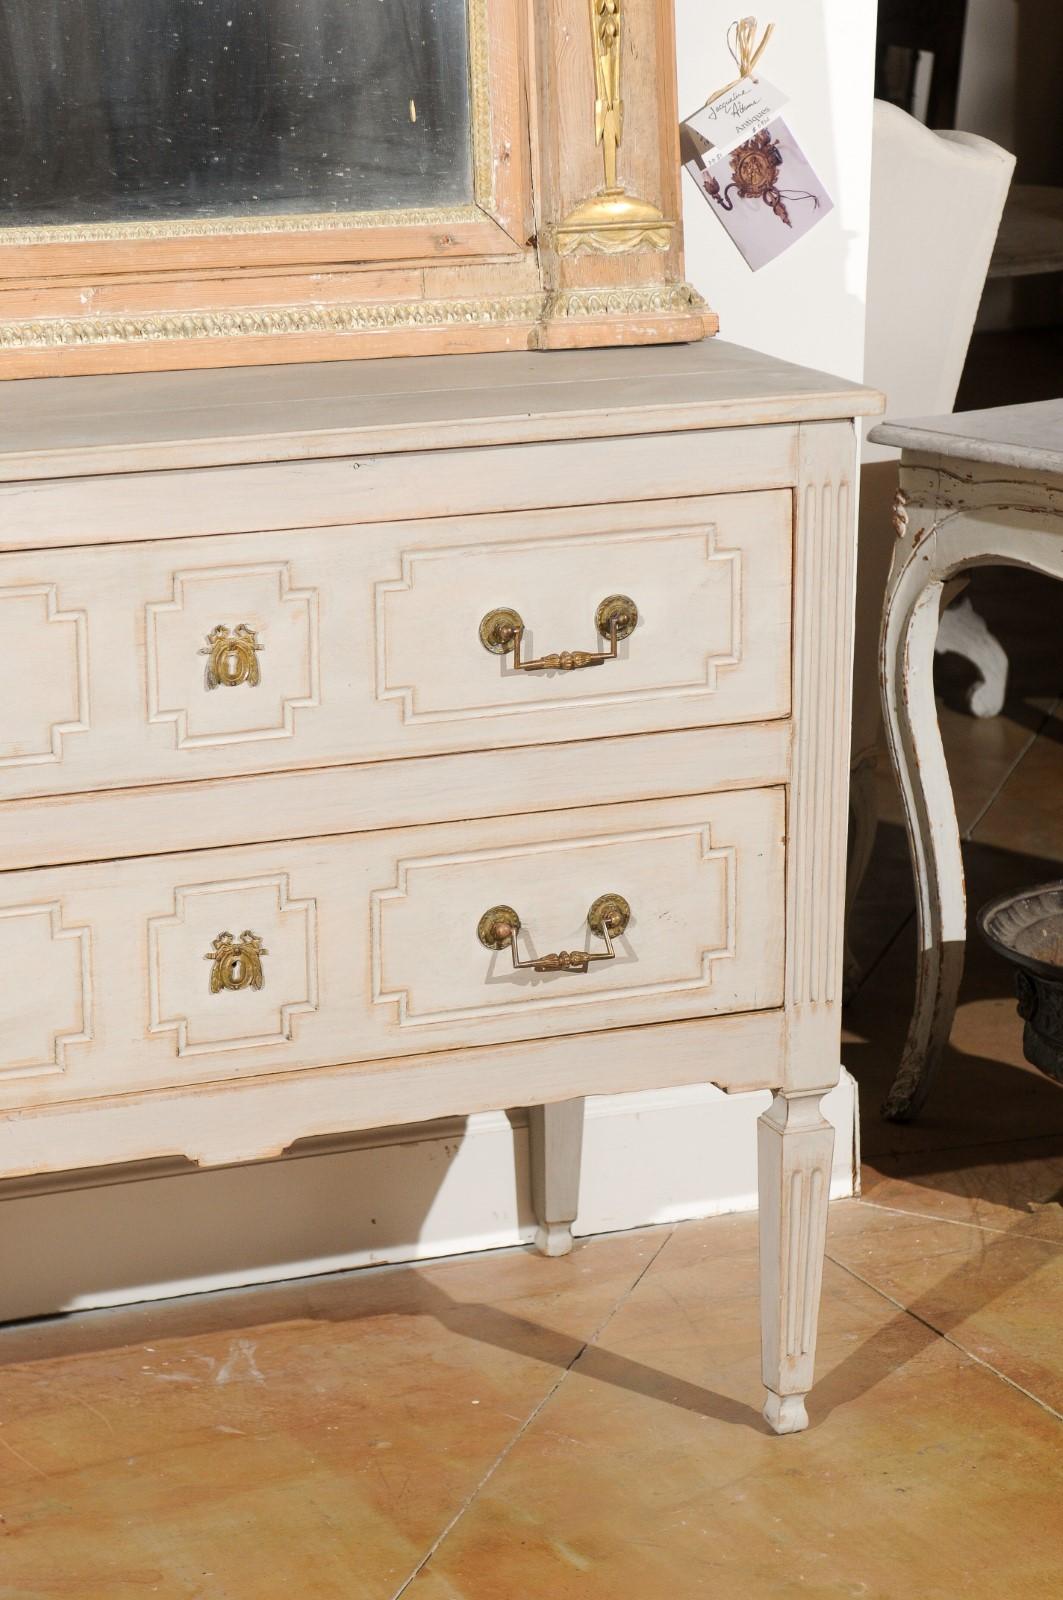 A French Louis XVI period painted two-drawer commode from the late 18th century, with fluted accents and bronze hardware. Born in France at the end of King Louis XVI's reign, this painted commode features a rectangular top sitting above two hand-cut